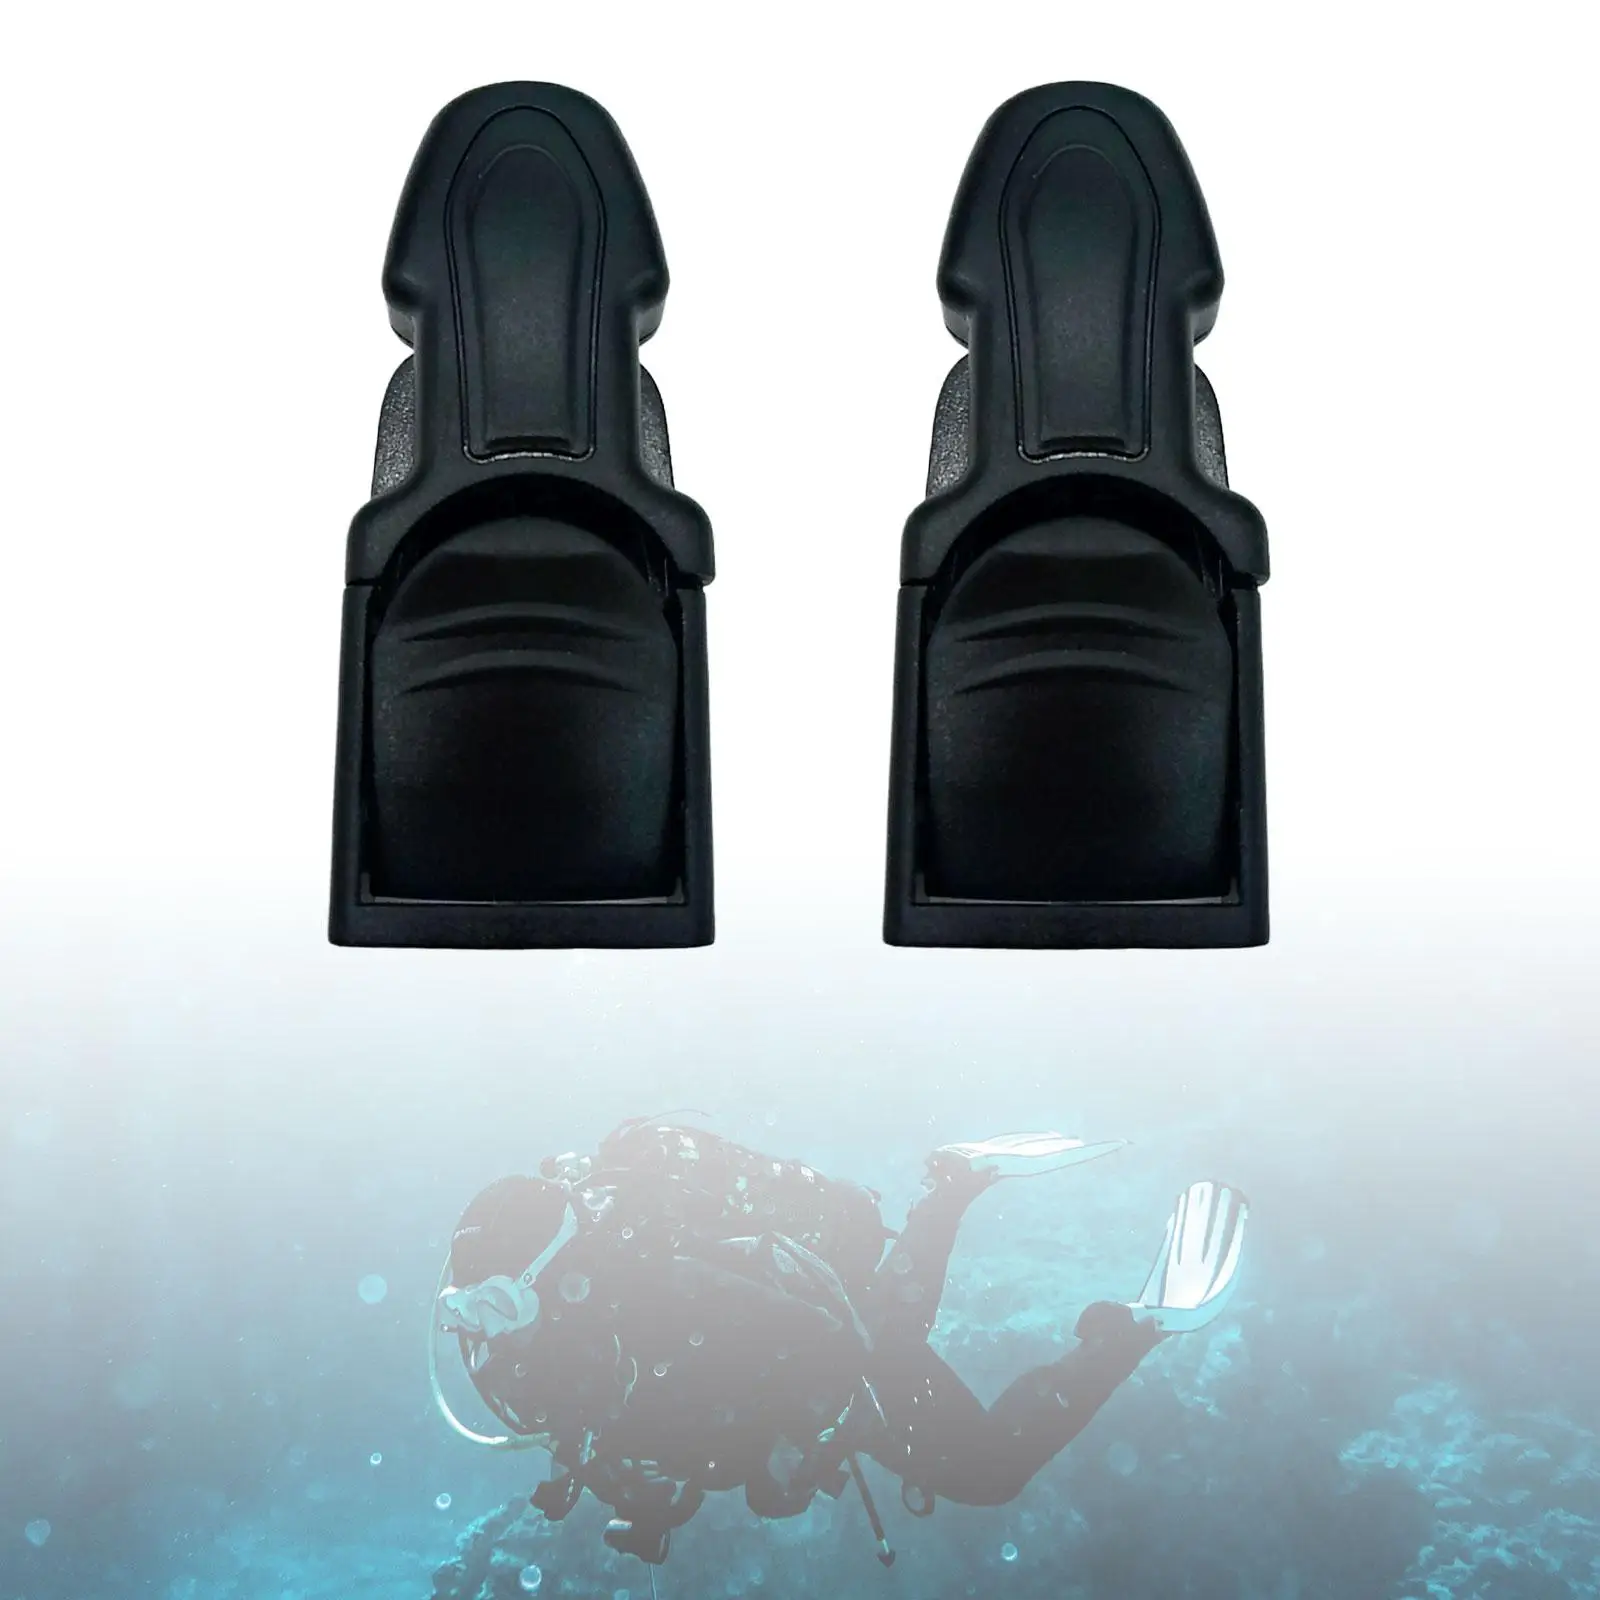 2x Diving Fin Strap Buckles Adjustable Dive Fin Flippers Strap Quick Release Buckle Accessories for Scuba Diving Snorkeling